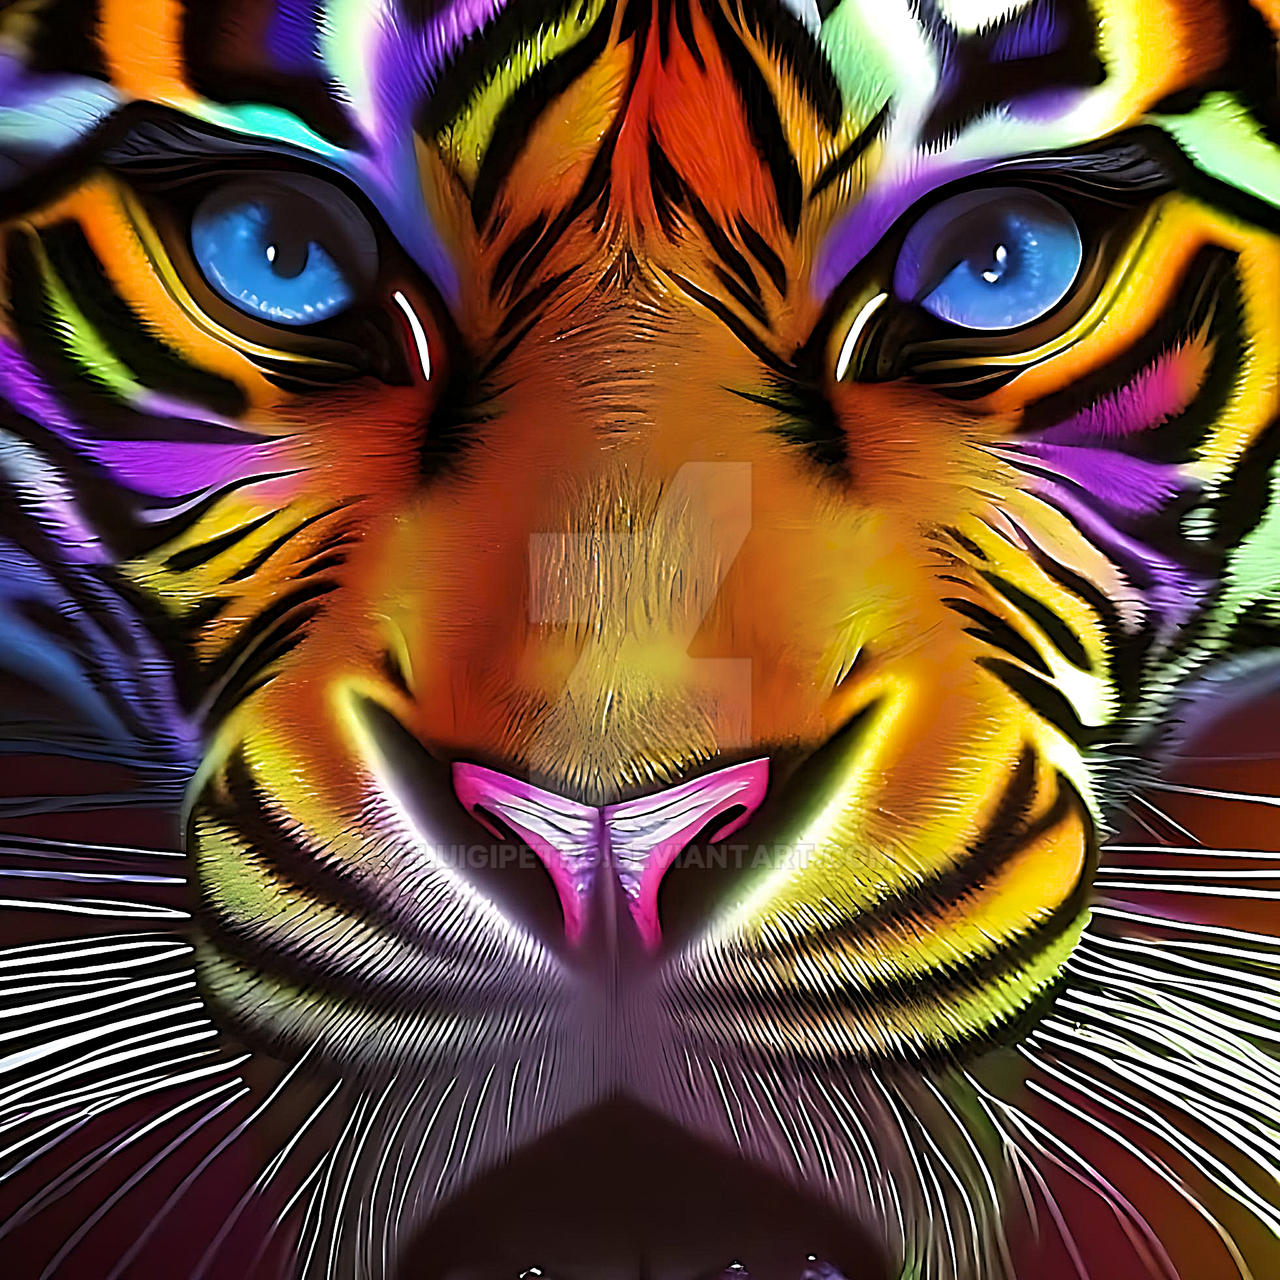 Siberian Tiger Portrait. Aggressive Stare Face Meaning Danger for